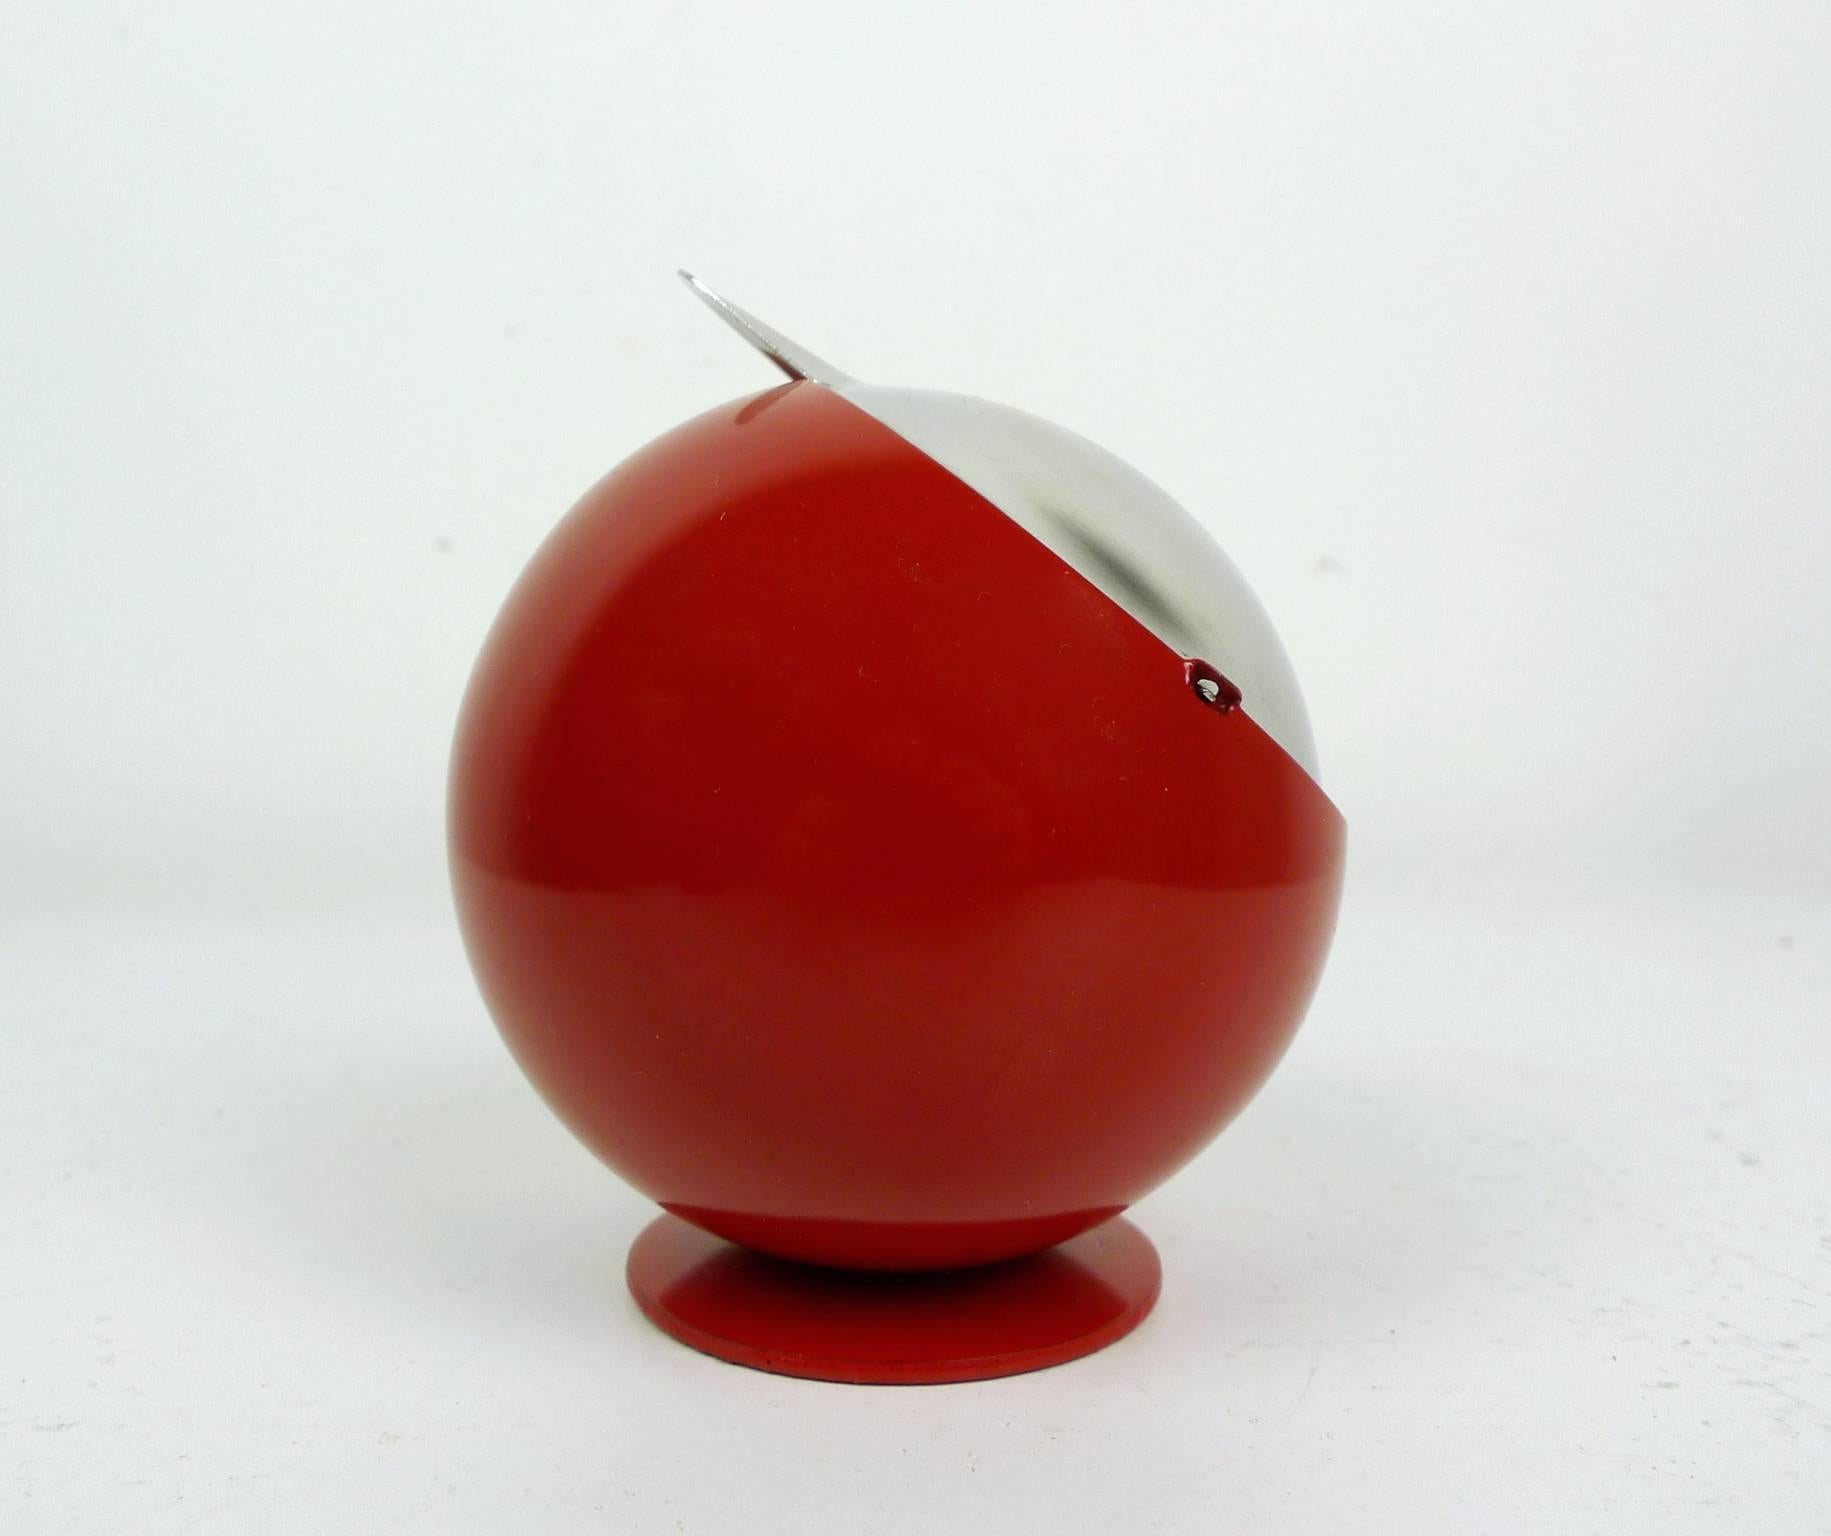 This red metal spherical ashtray with a foldable cigar tray is the Smokny model, developed in the 1970s by the manufacturer F.W. Quist, and produced in Germany. It is in good shape.